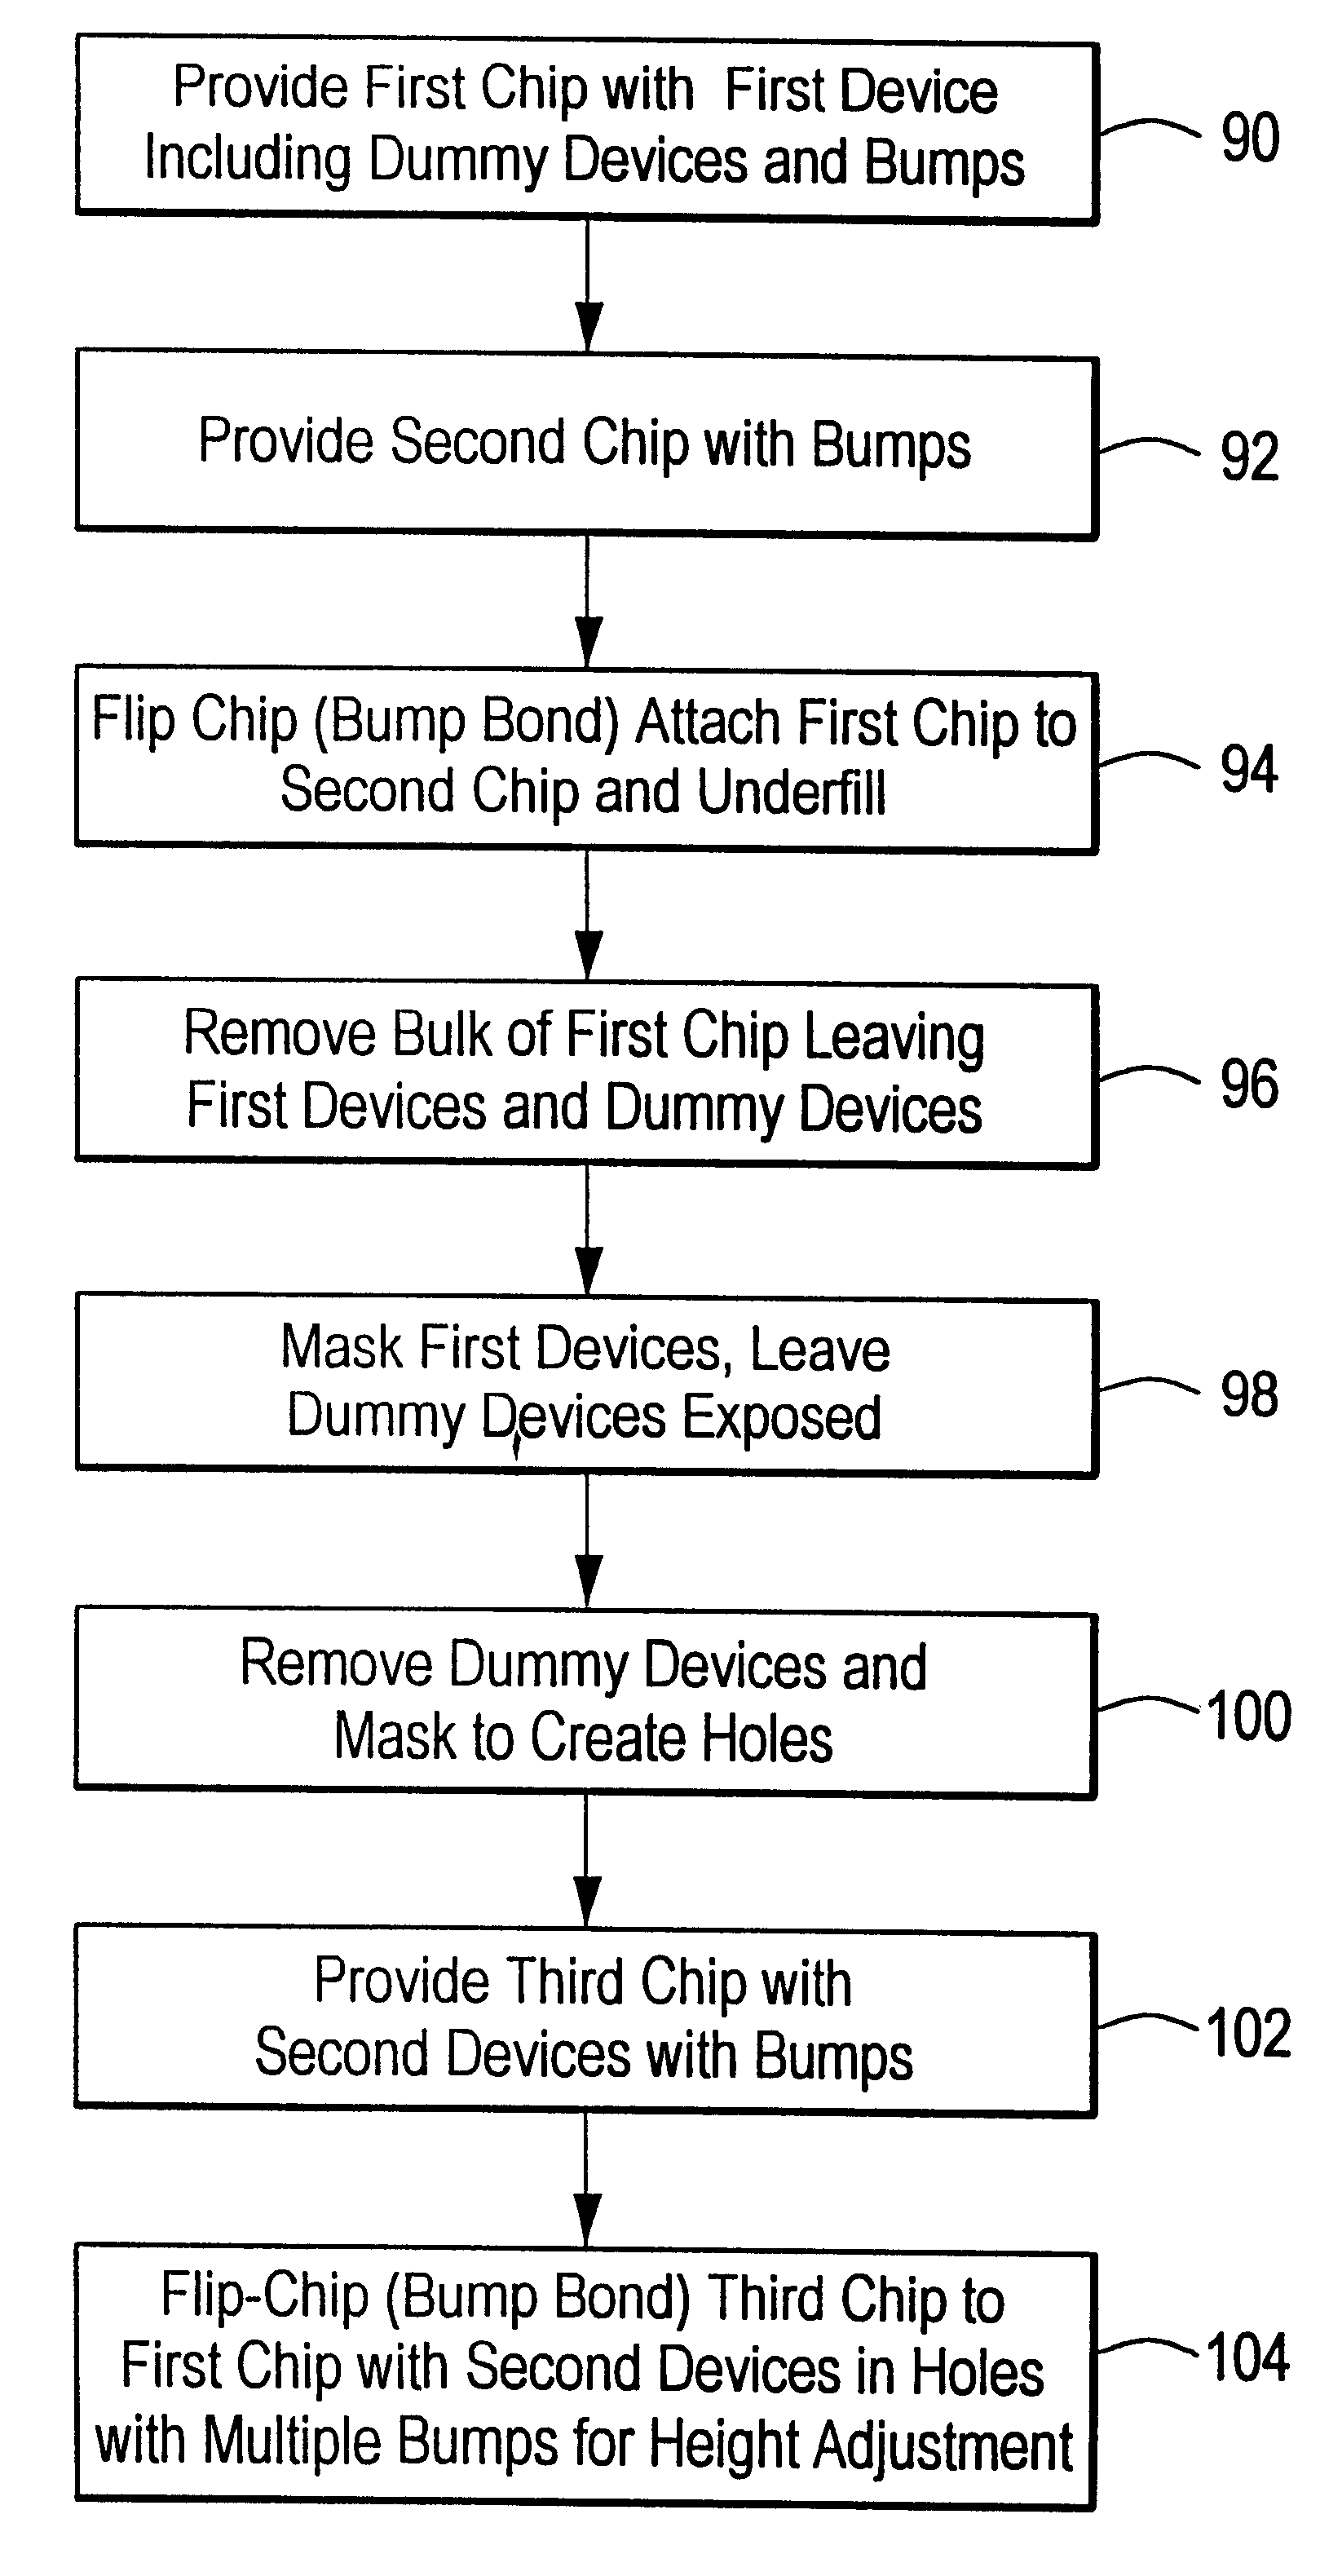 Method of equalizing device heights on a chip